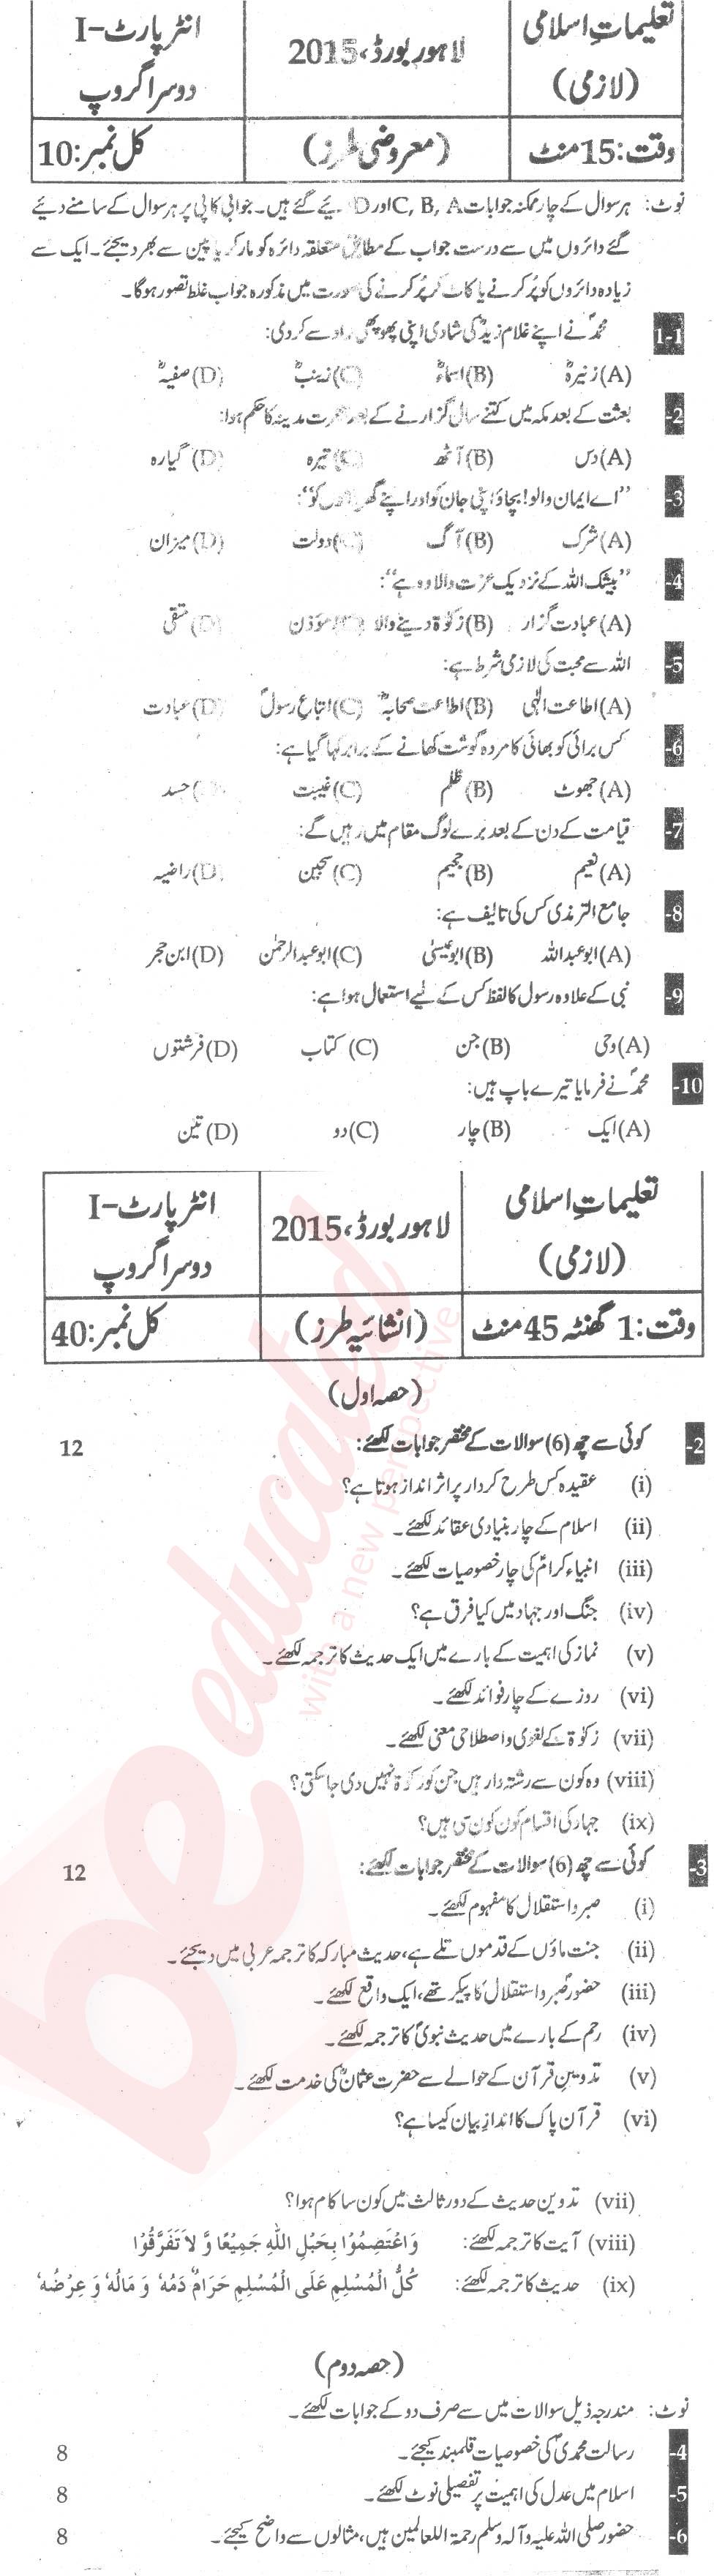 Islamic Studies 11th class Past Paper Group 2 BISE Lahore 2015